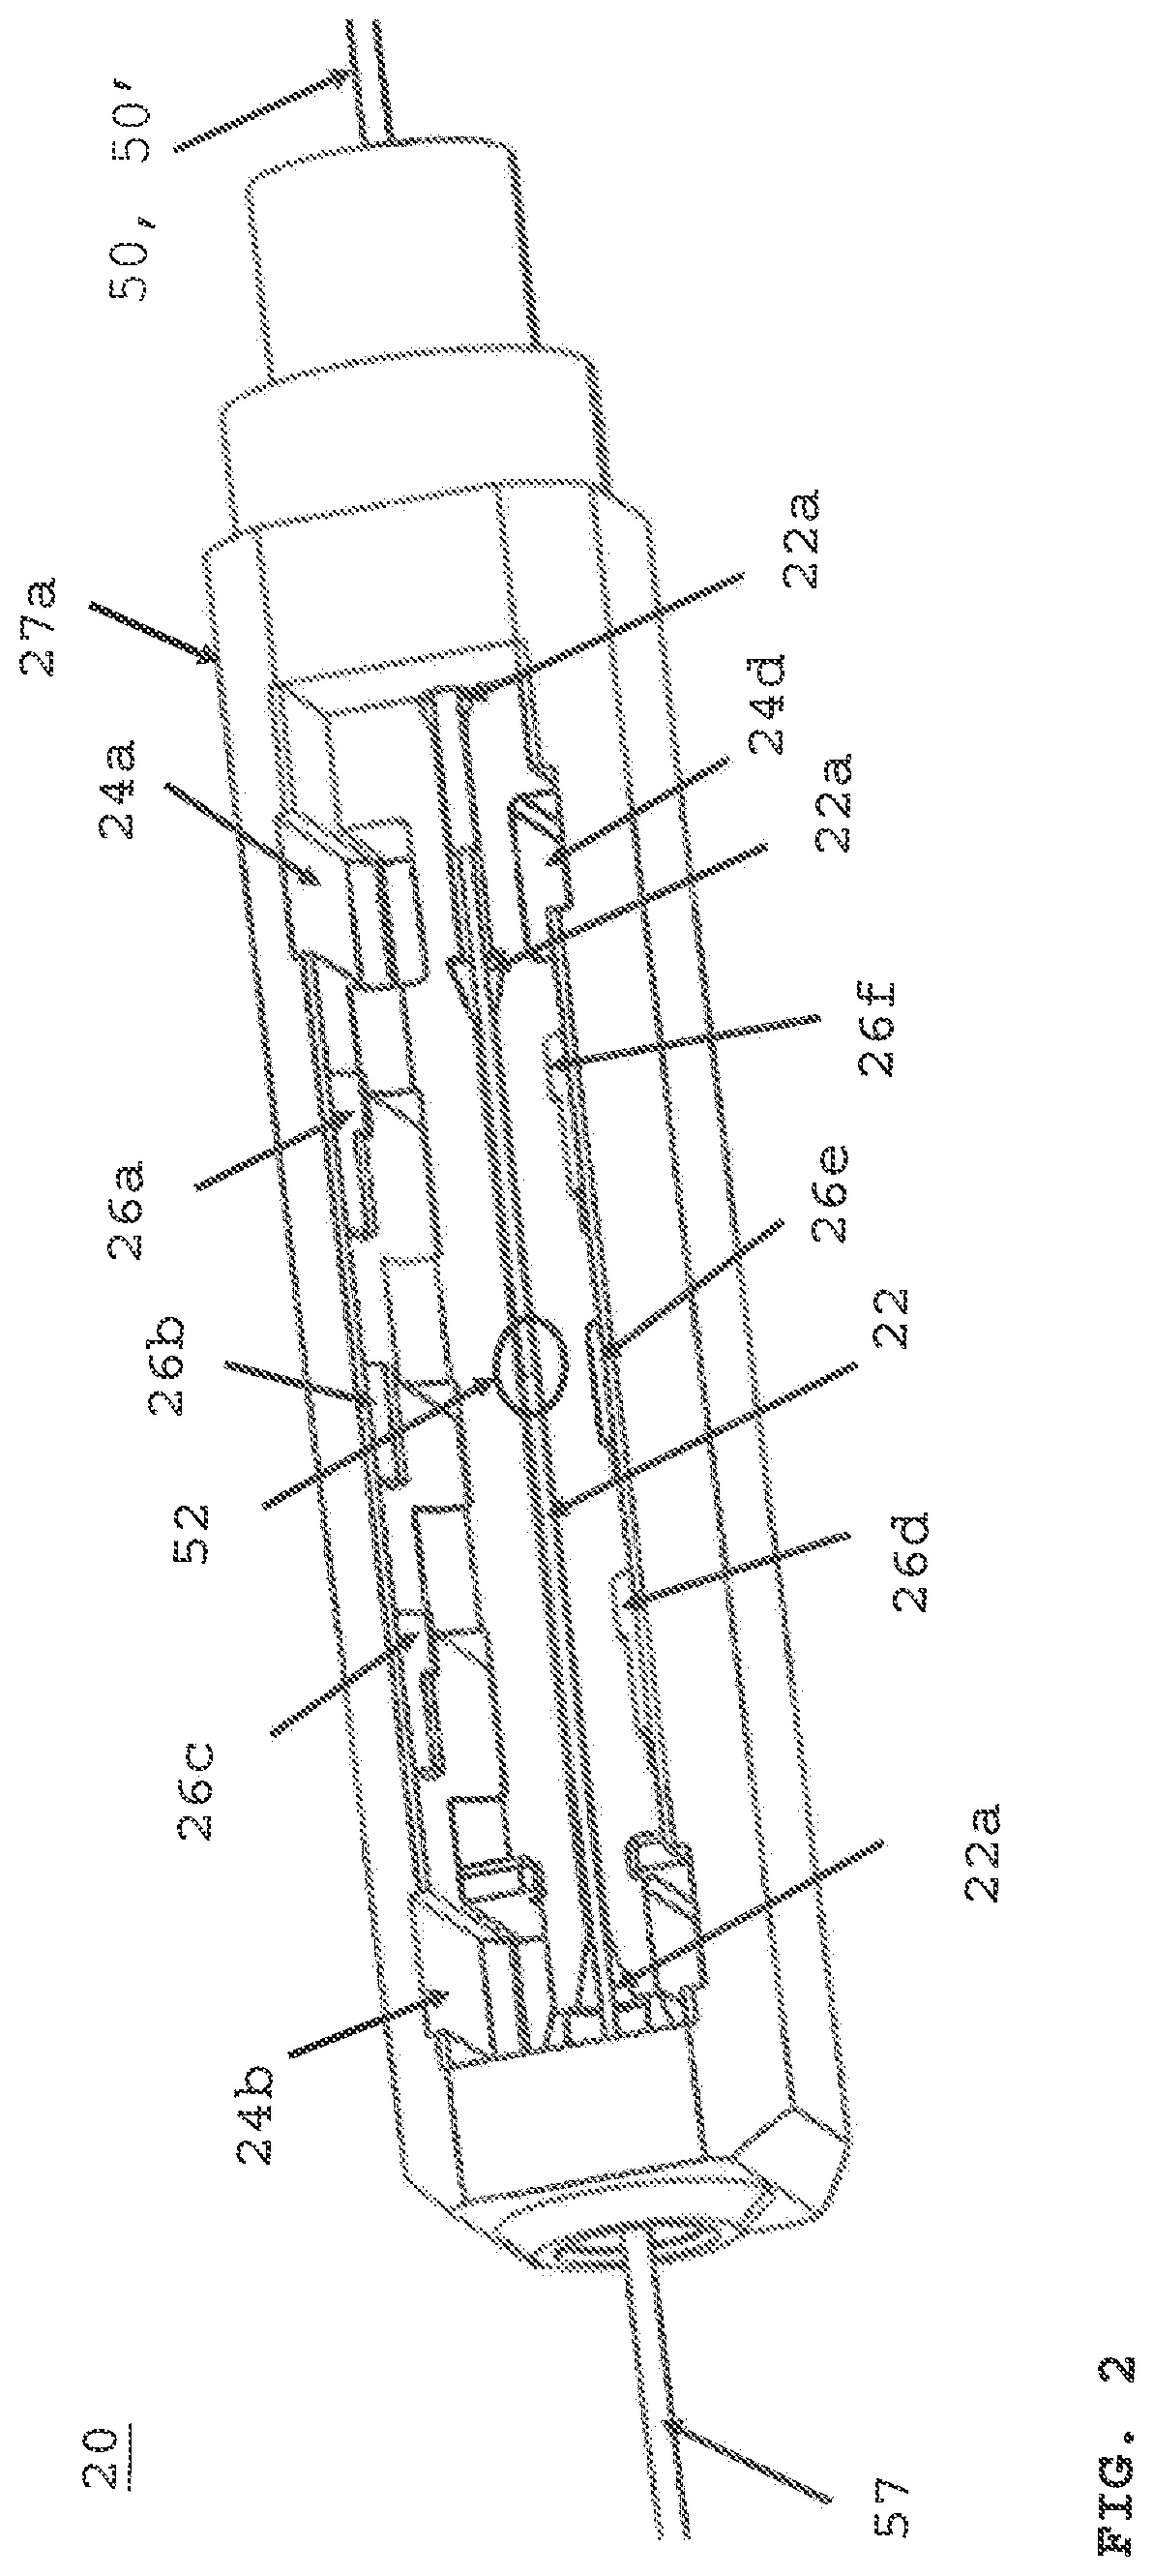 Mechanical splice assembly for splicing opposing optical fibers within a fiber optic connector and method of performing the same